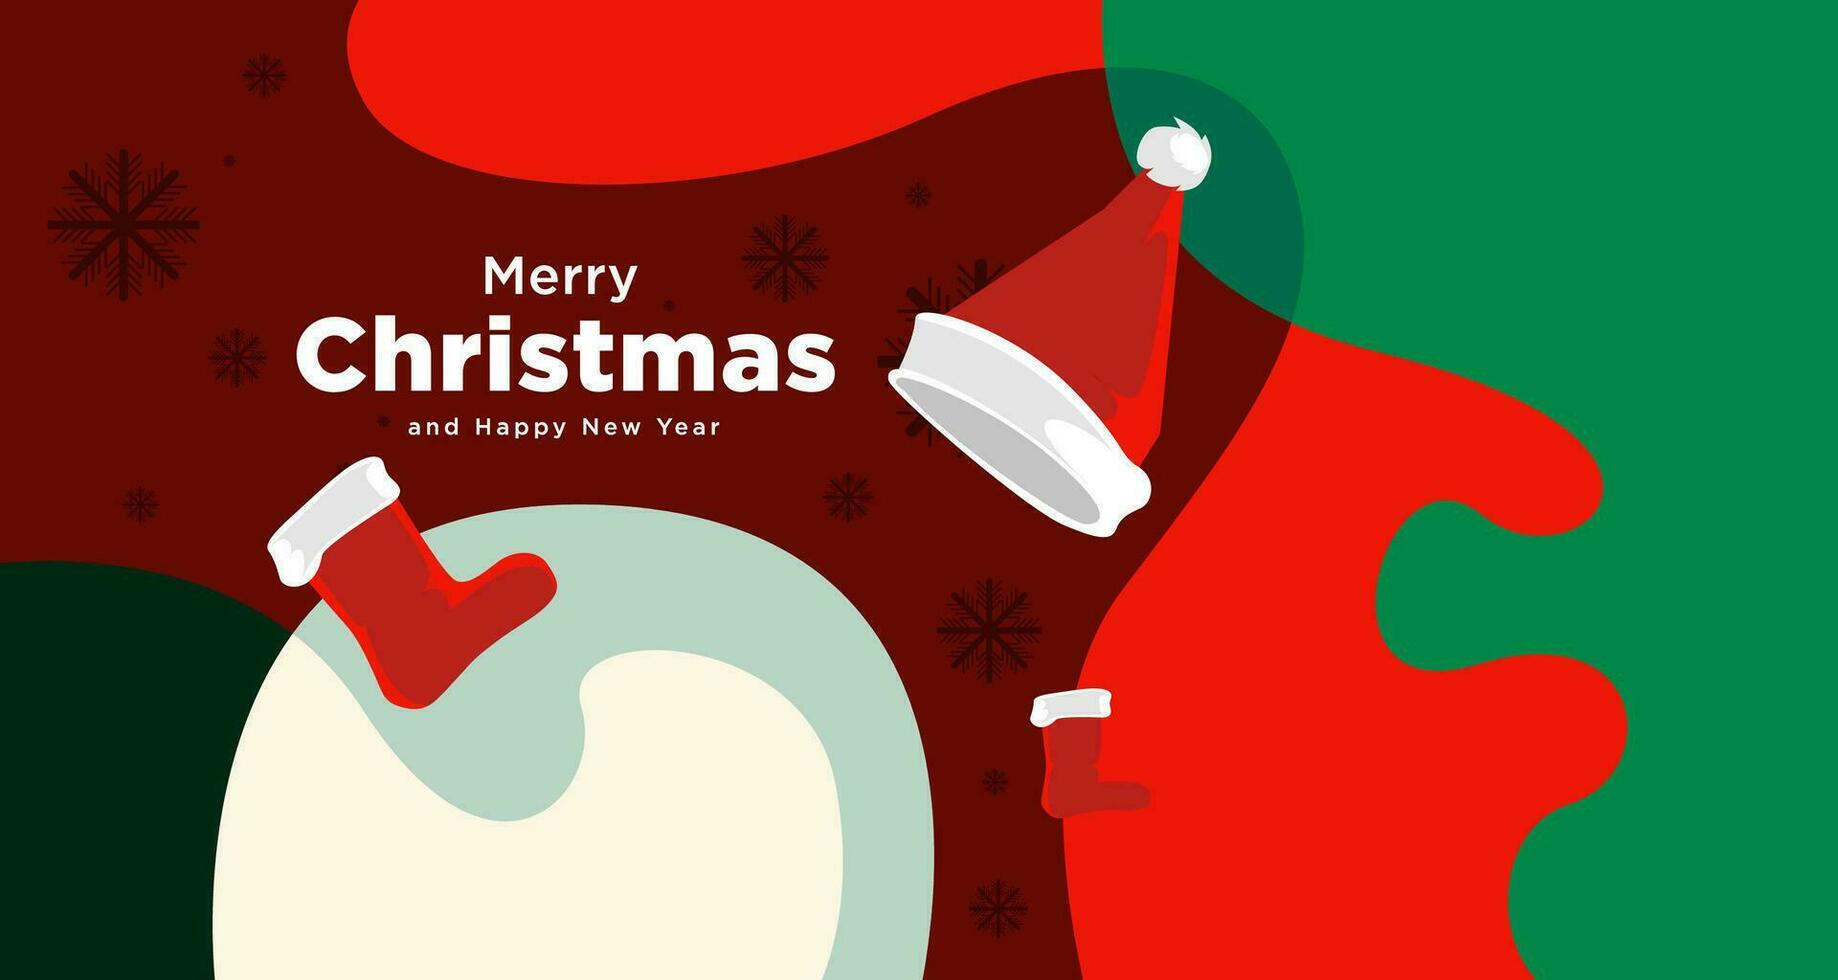 Merry Christmas card and banner vector illustration in red  white and green colors 2024